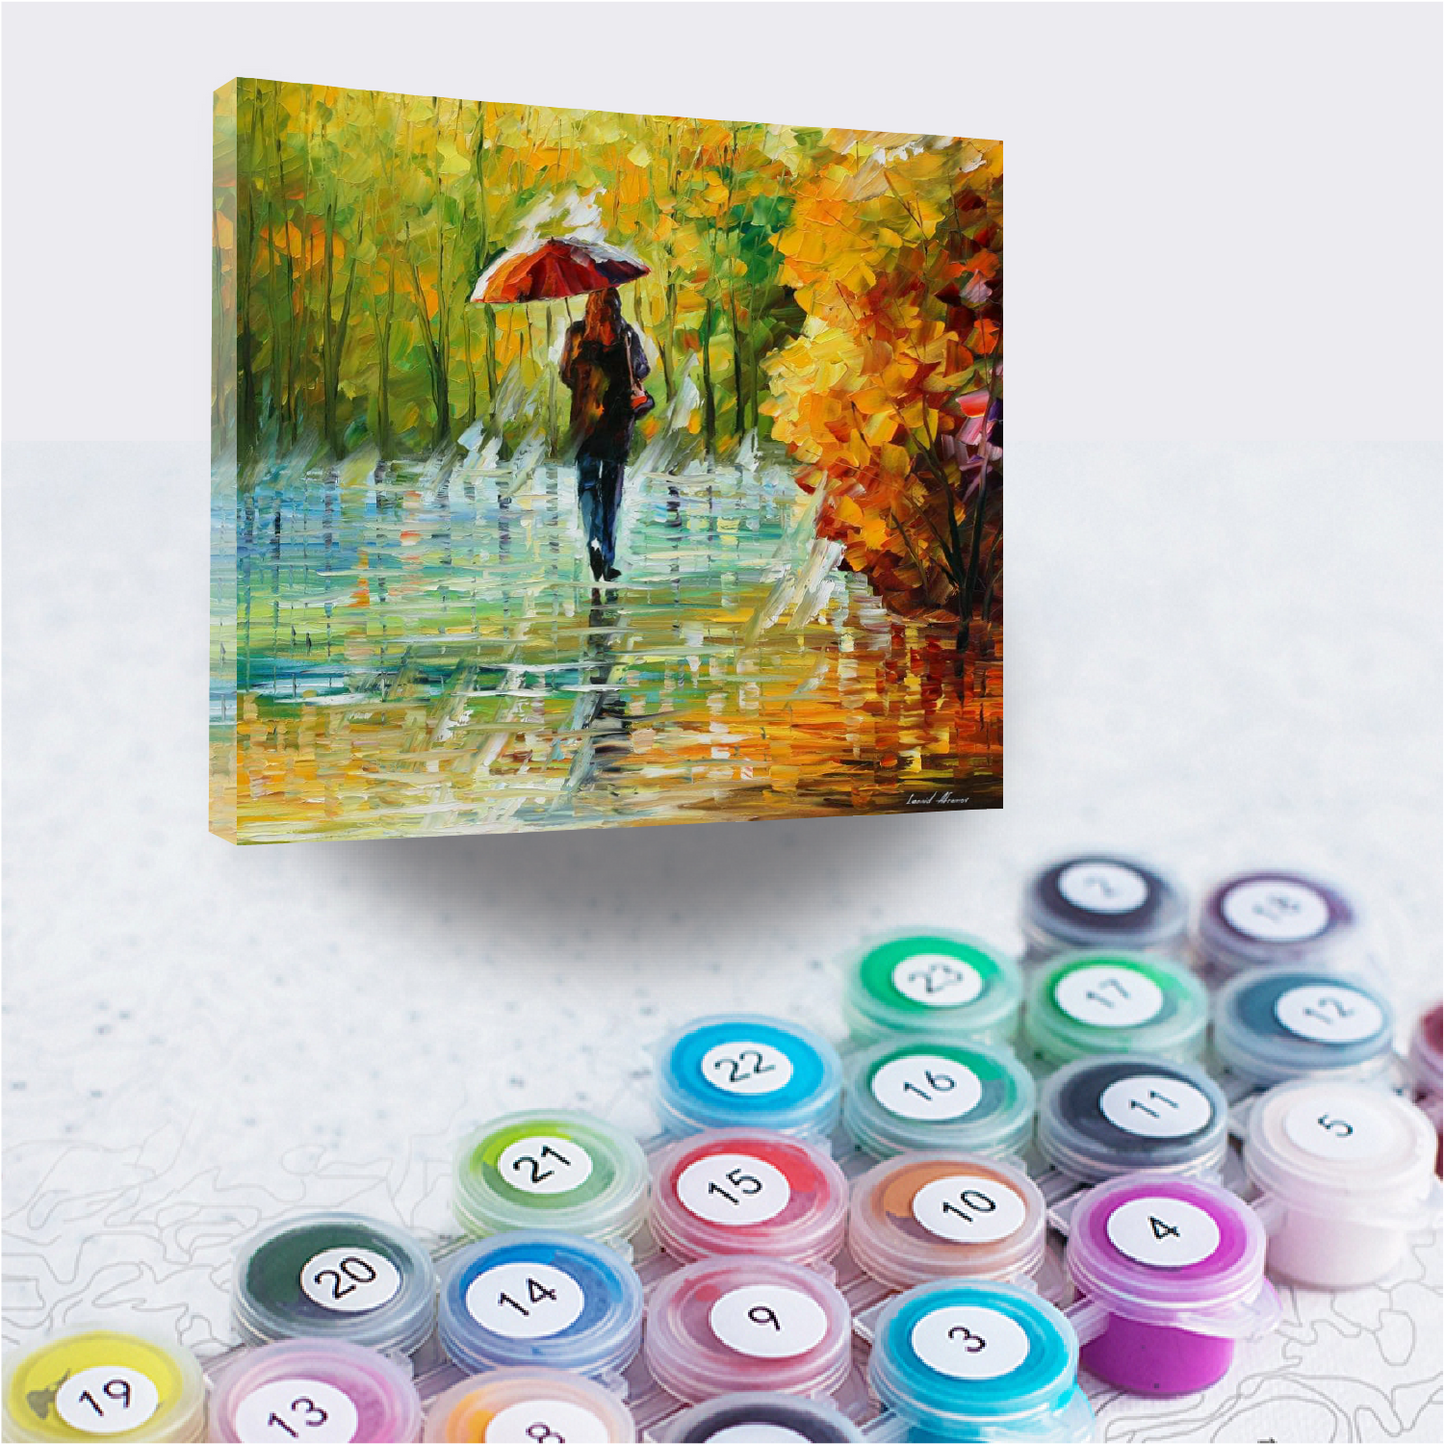 THE BEAUTY OF THE RAIN - Afremov -  Paint By Numbers Kit